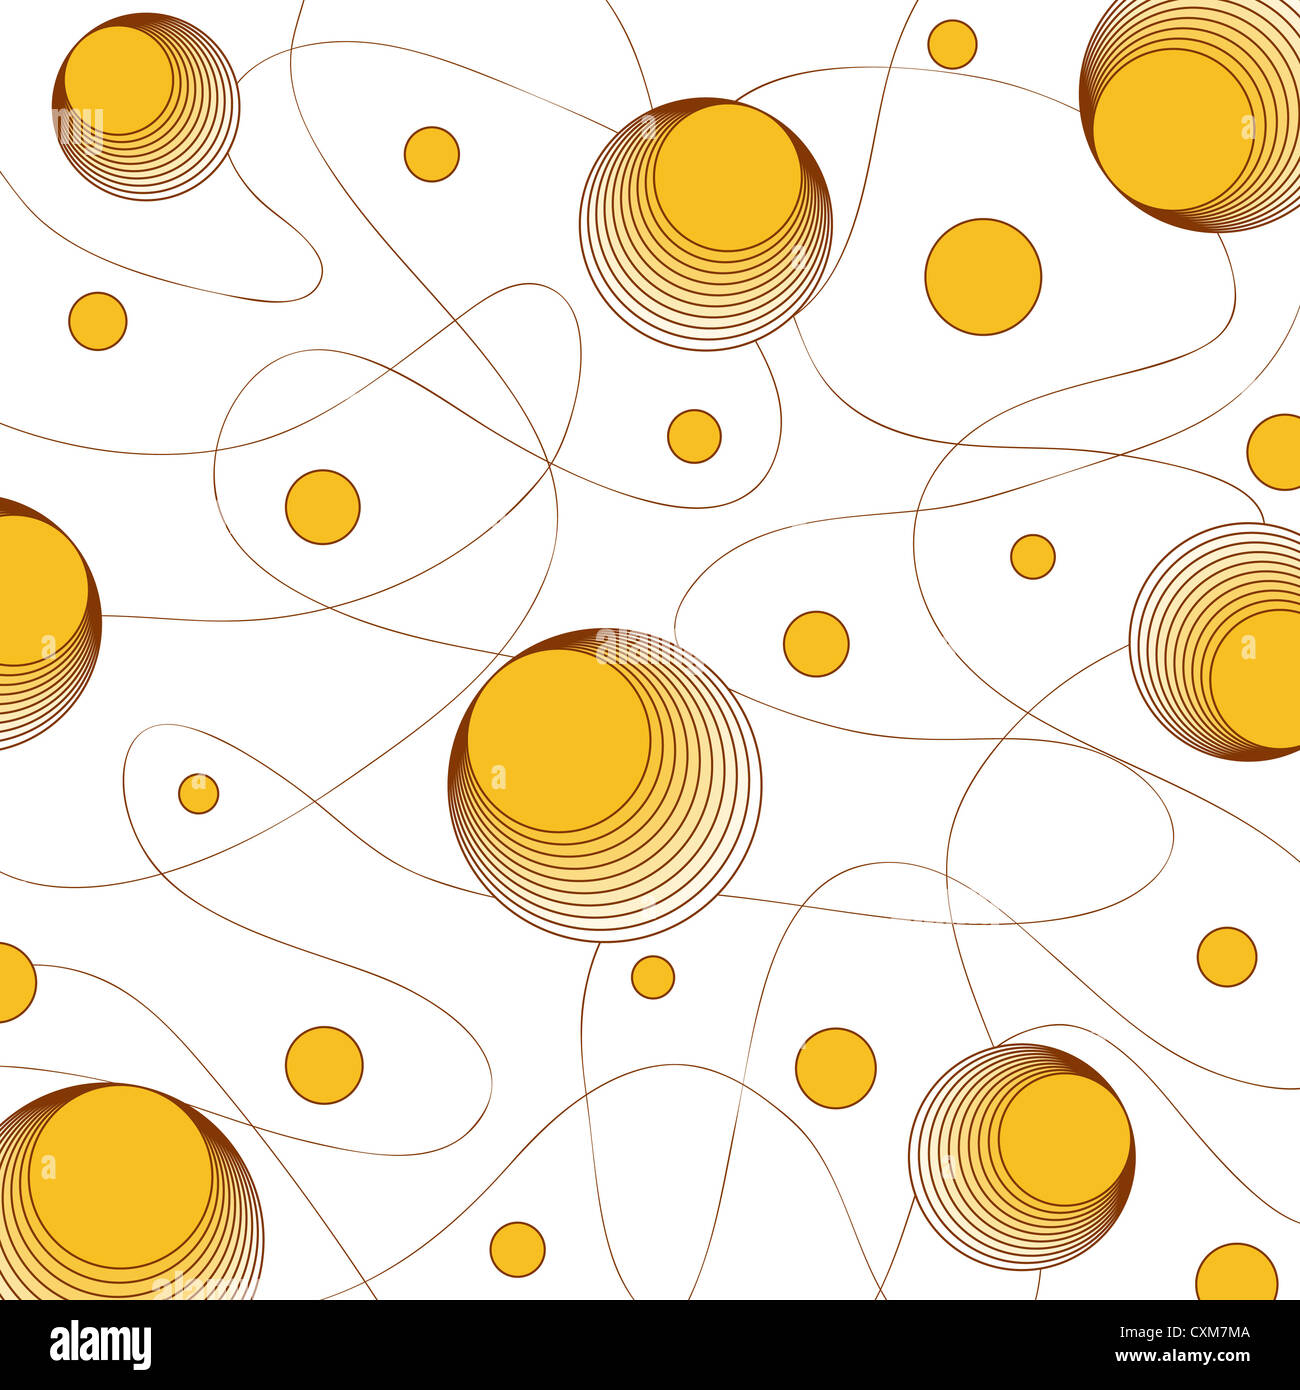 Circles and curves in yellow and brown on white Stock Photo